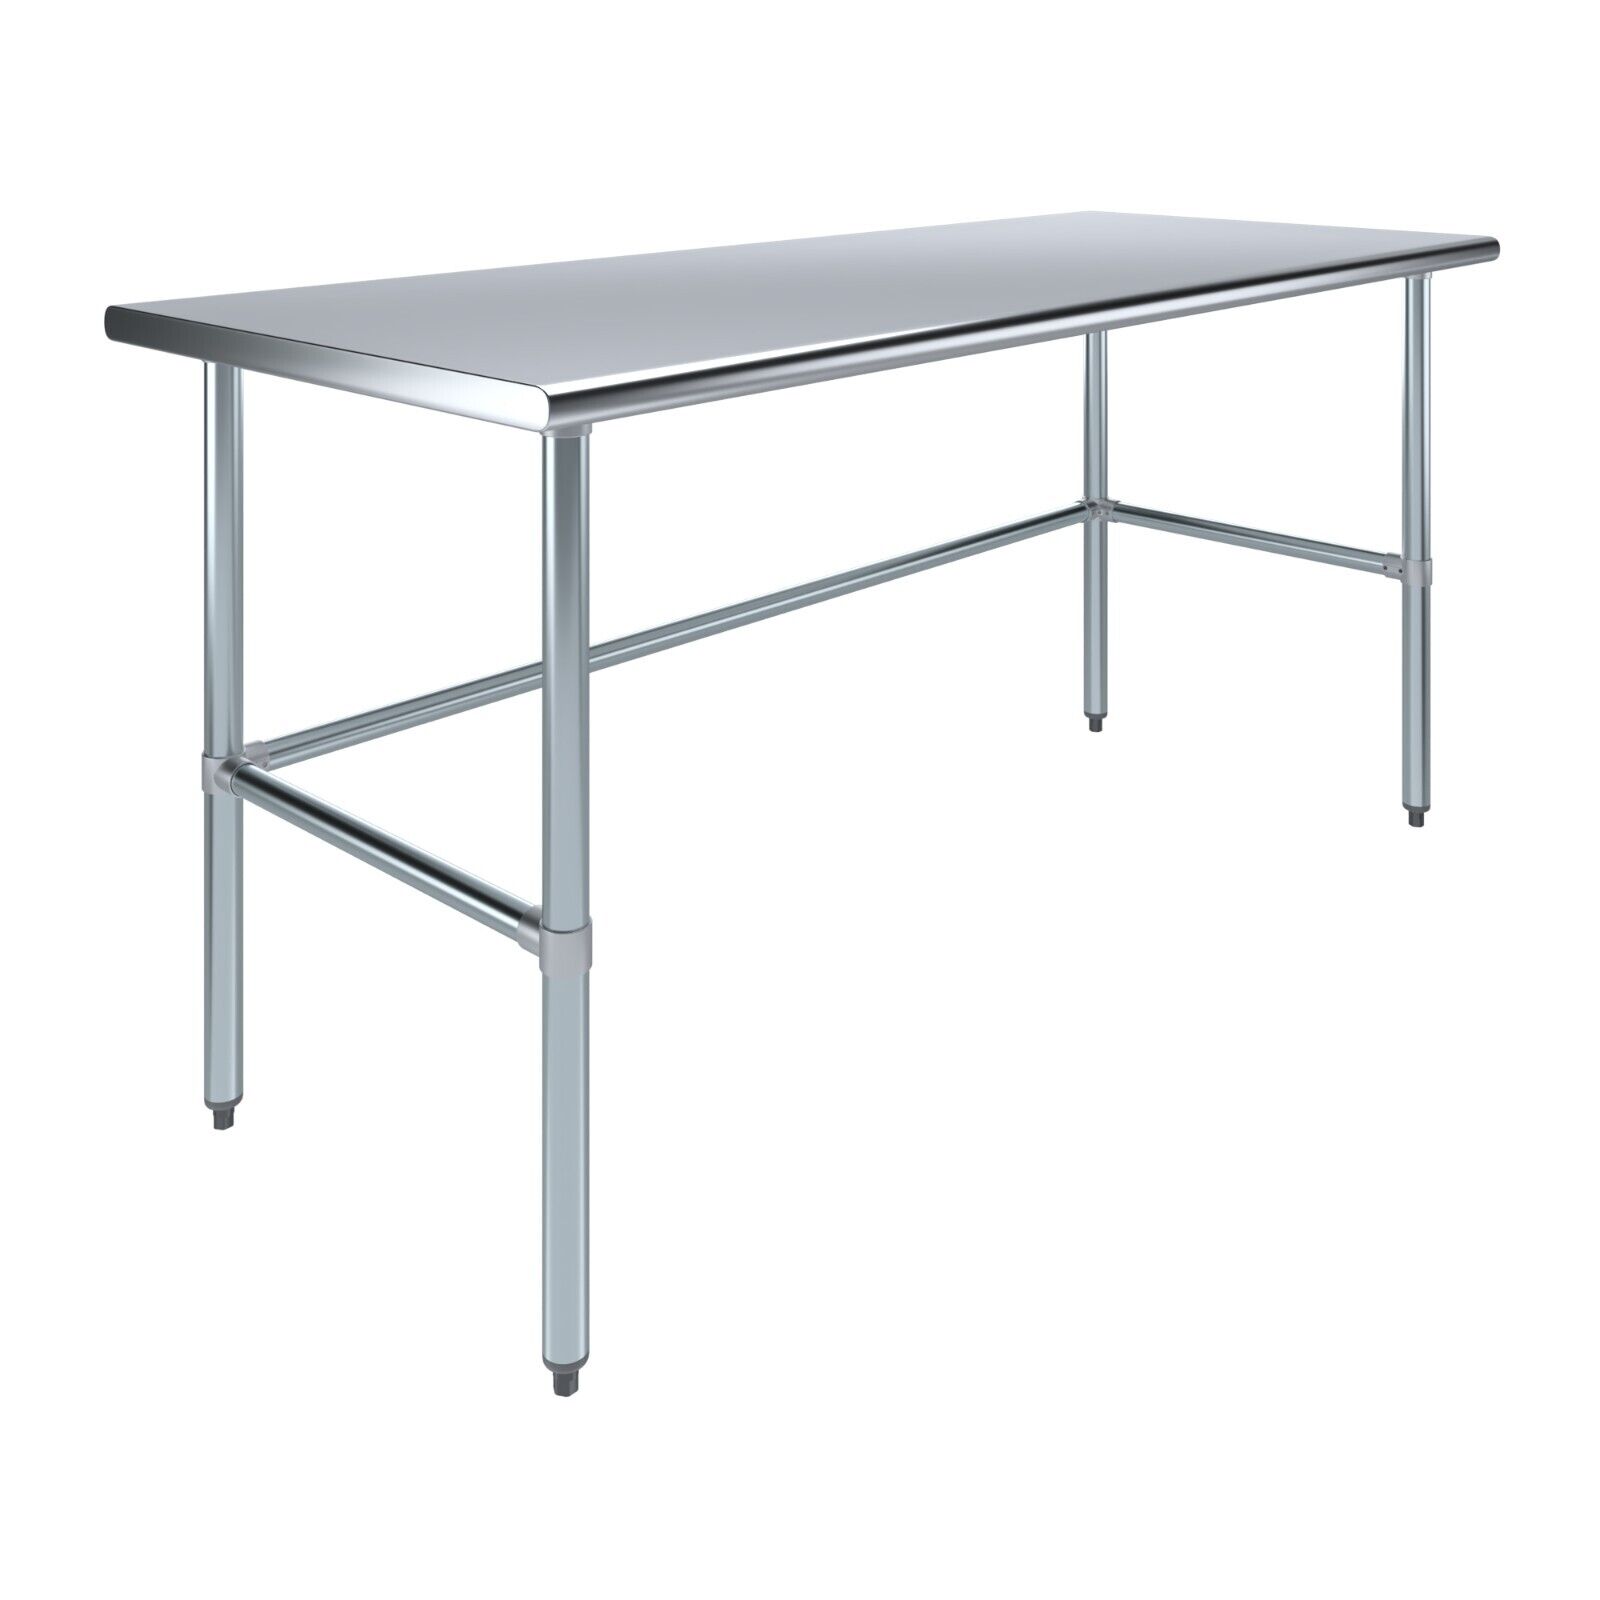 30 in. x 72 in. Open Base Stainless Steel Work Table | Residential & Commercial